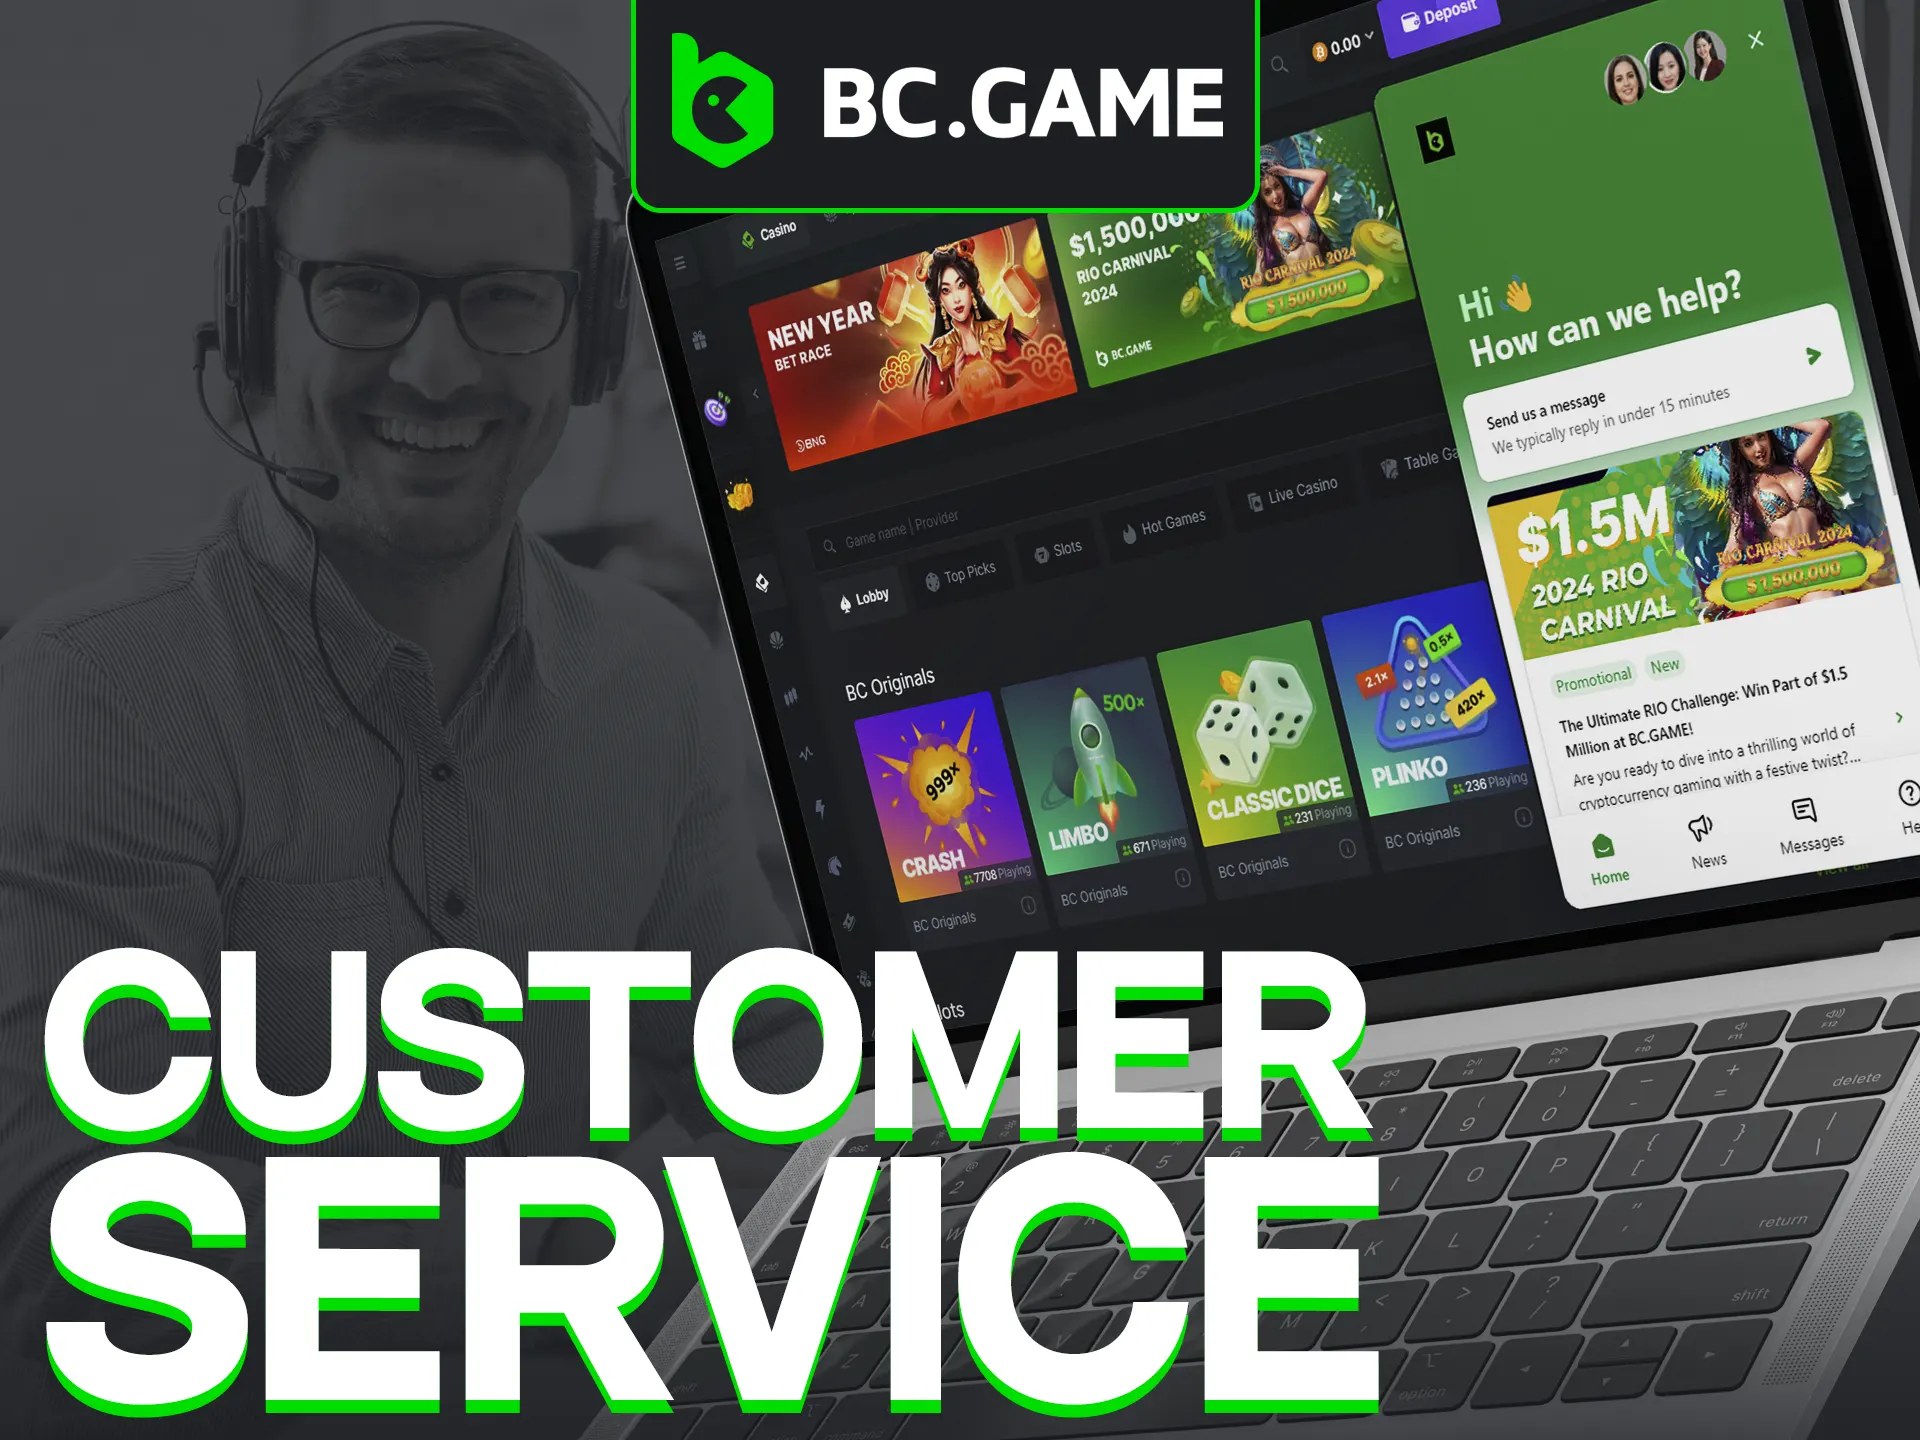 BC Game offers responsive 24/7 customer support.